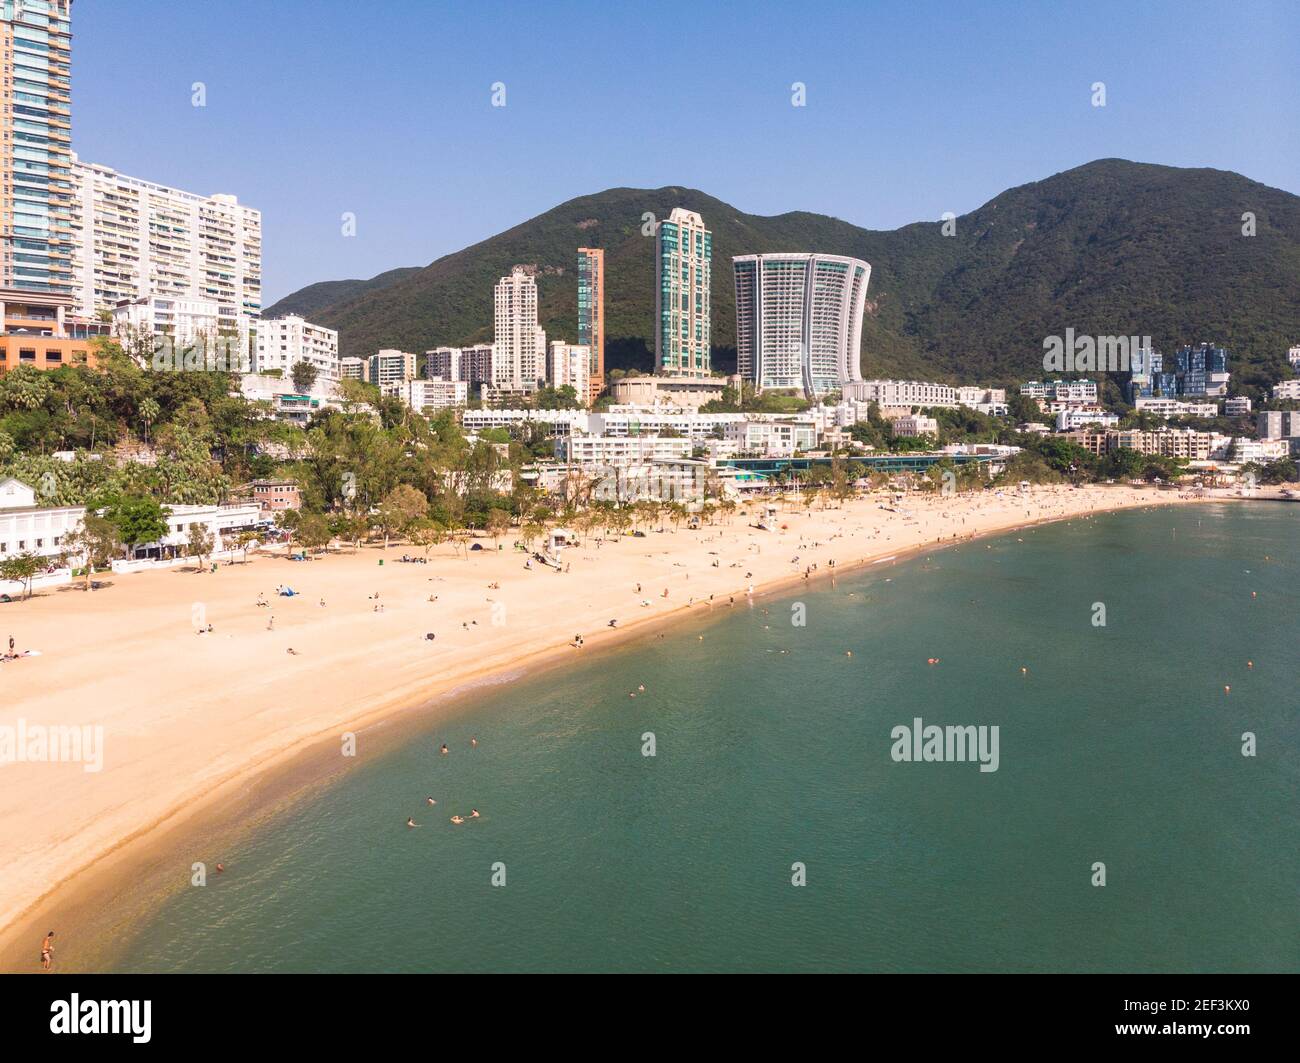 Aerial view of the famous Repulse bay sandy beach and skyline in Hong Kong island by the South China Sea Stock Photo